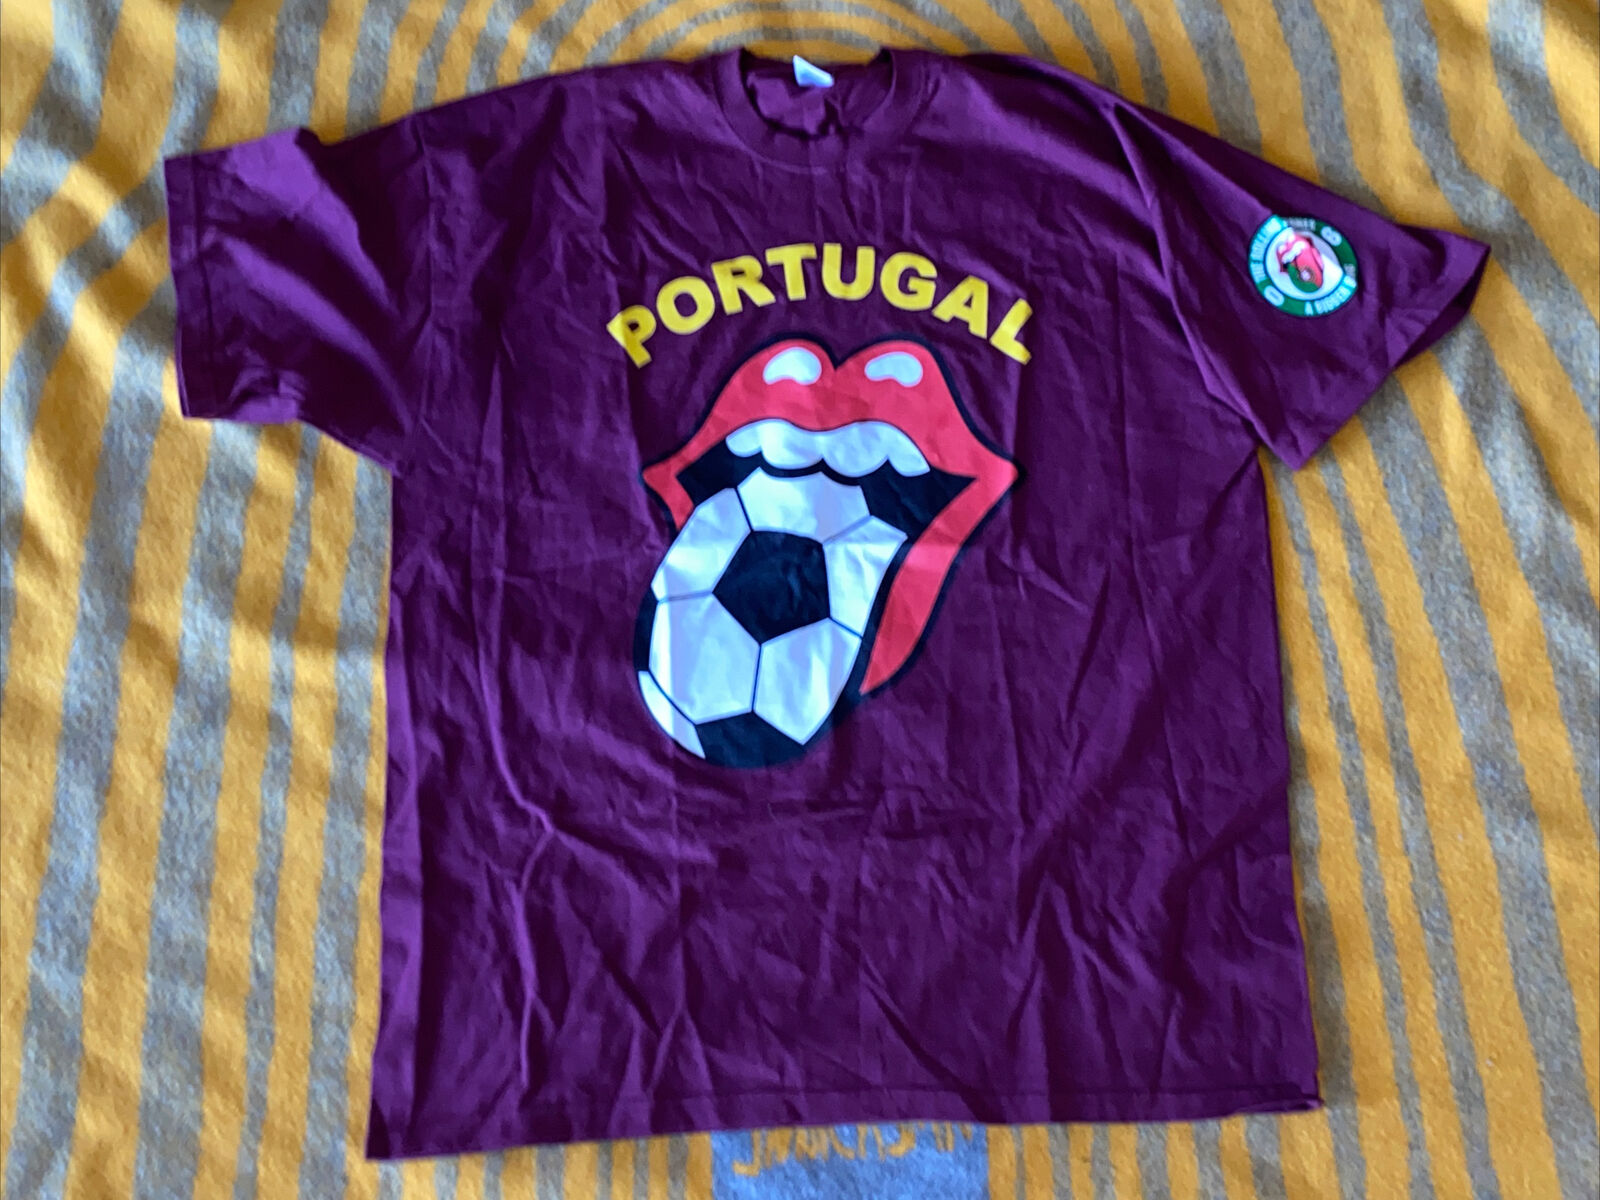 Vintage Rolling Stones Portugal Shirt Never Worn Original From The World Cup